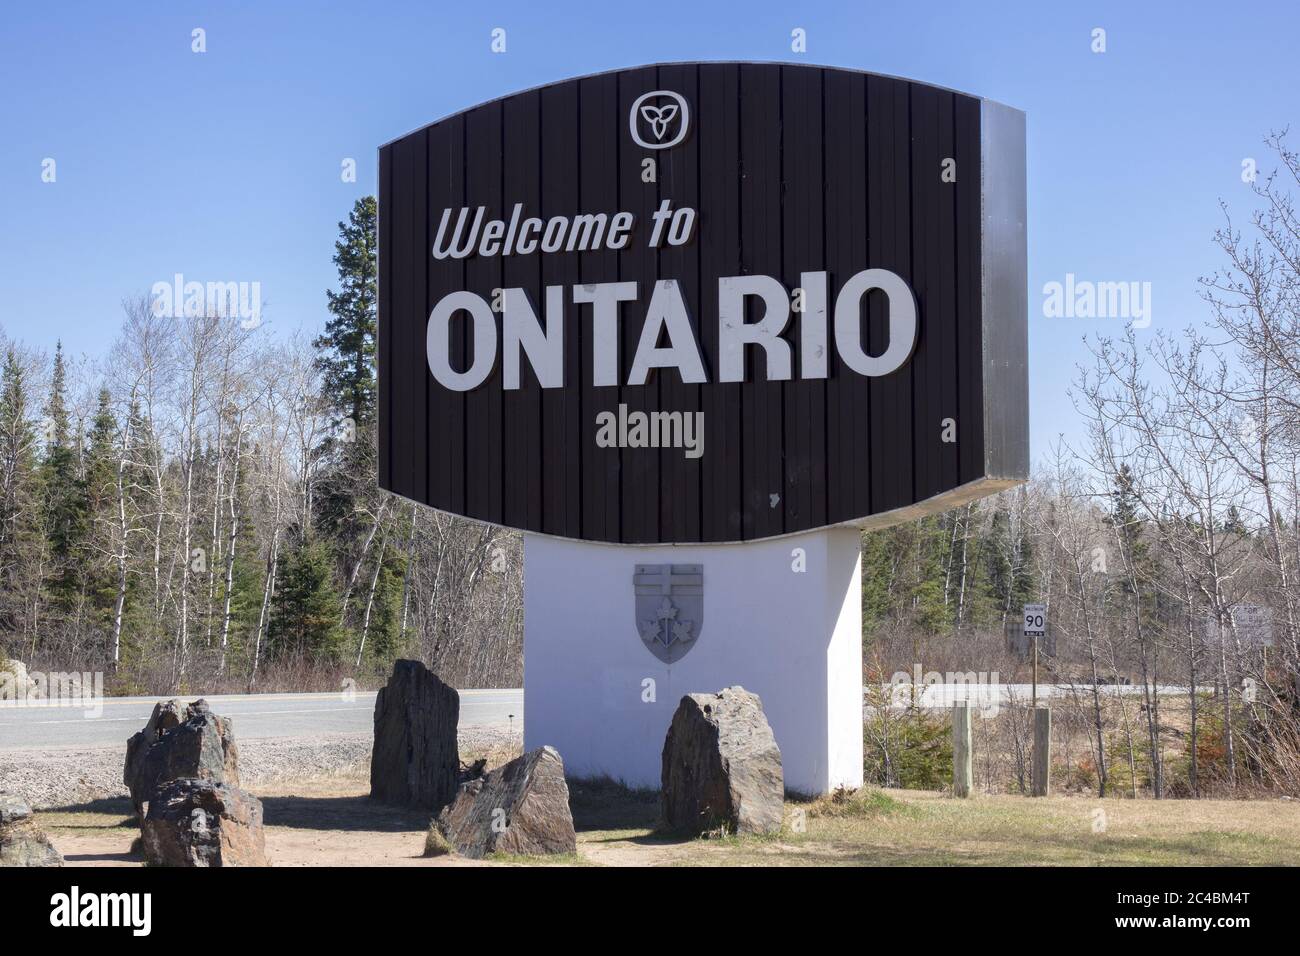 Welcome To Ontario Sign Marks The Provincial Border Between Manitoba And Ontario On The Trans Canada Highway In Northern Ontario Canada Stock Photo